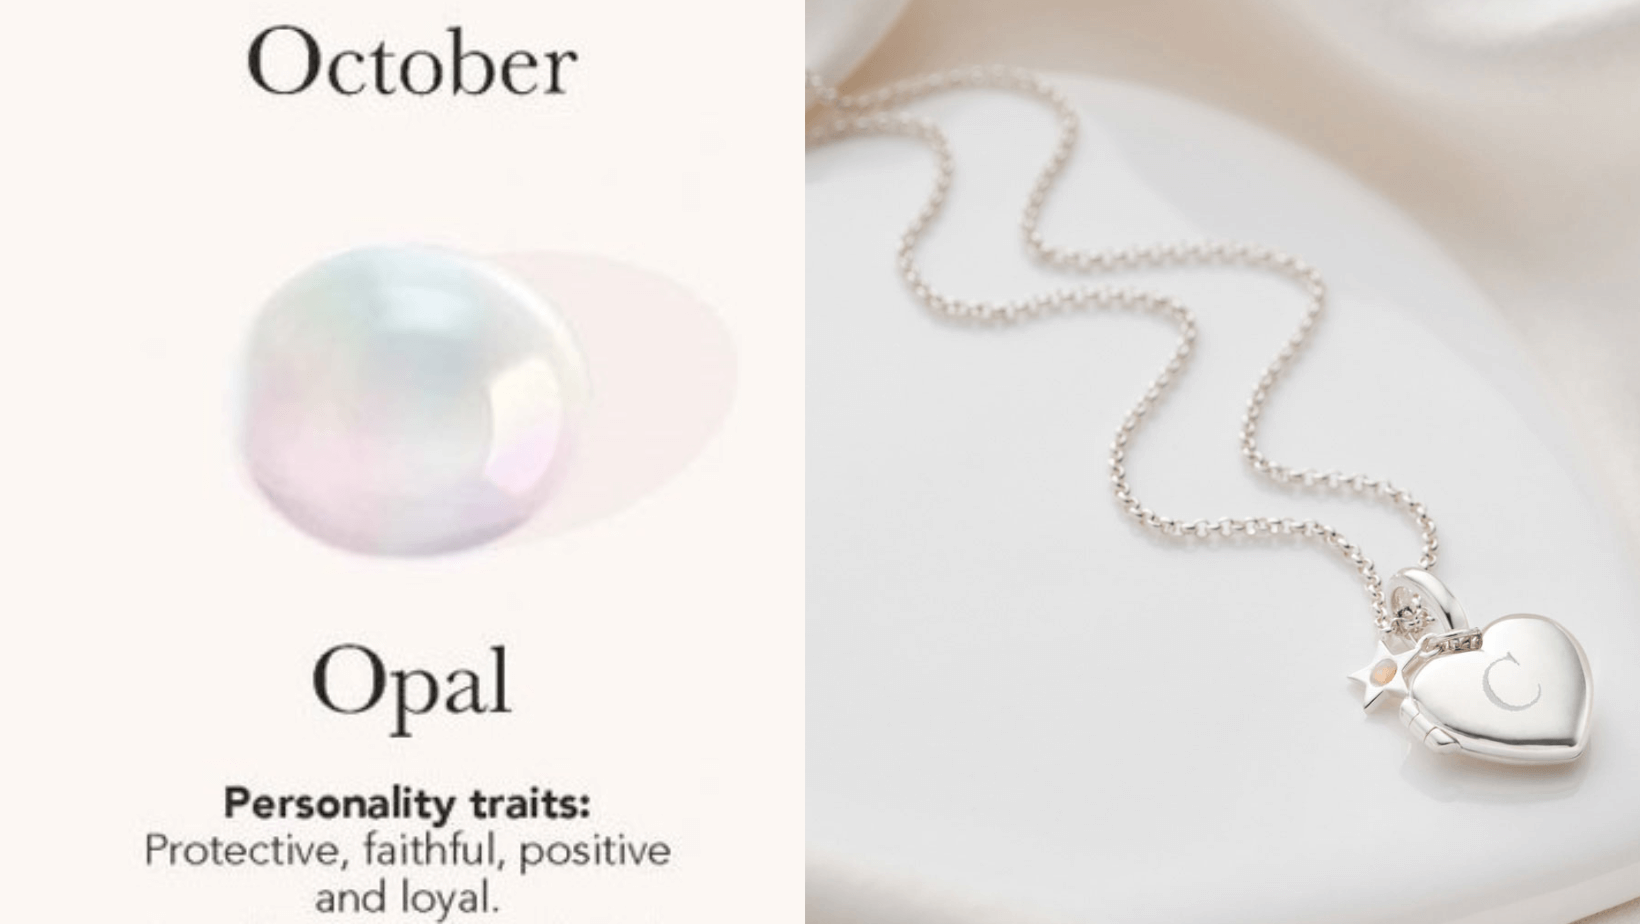 What is October's birthstone